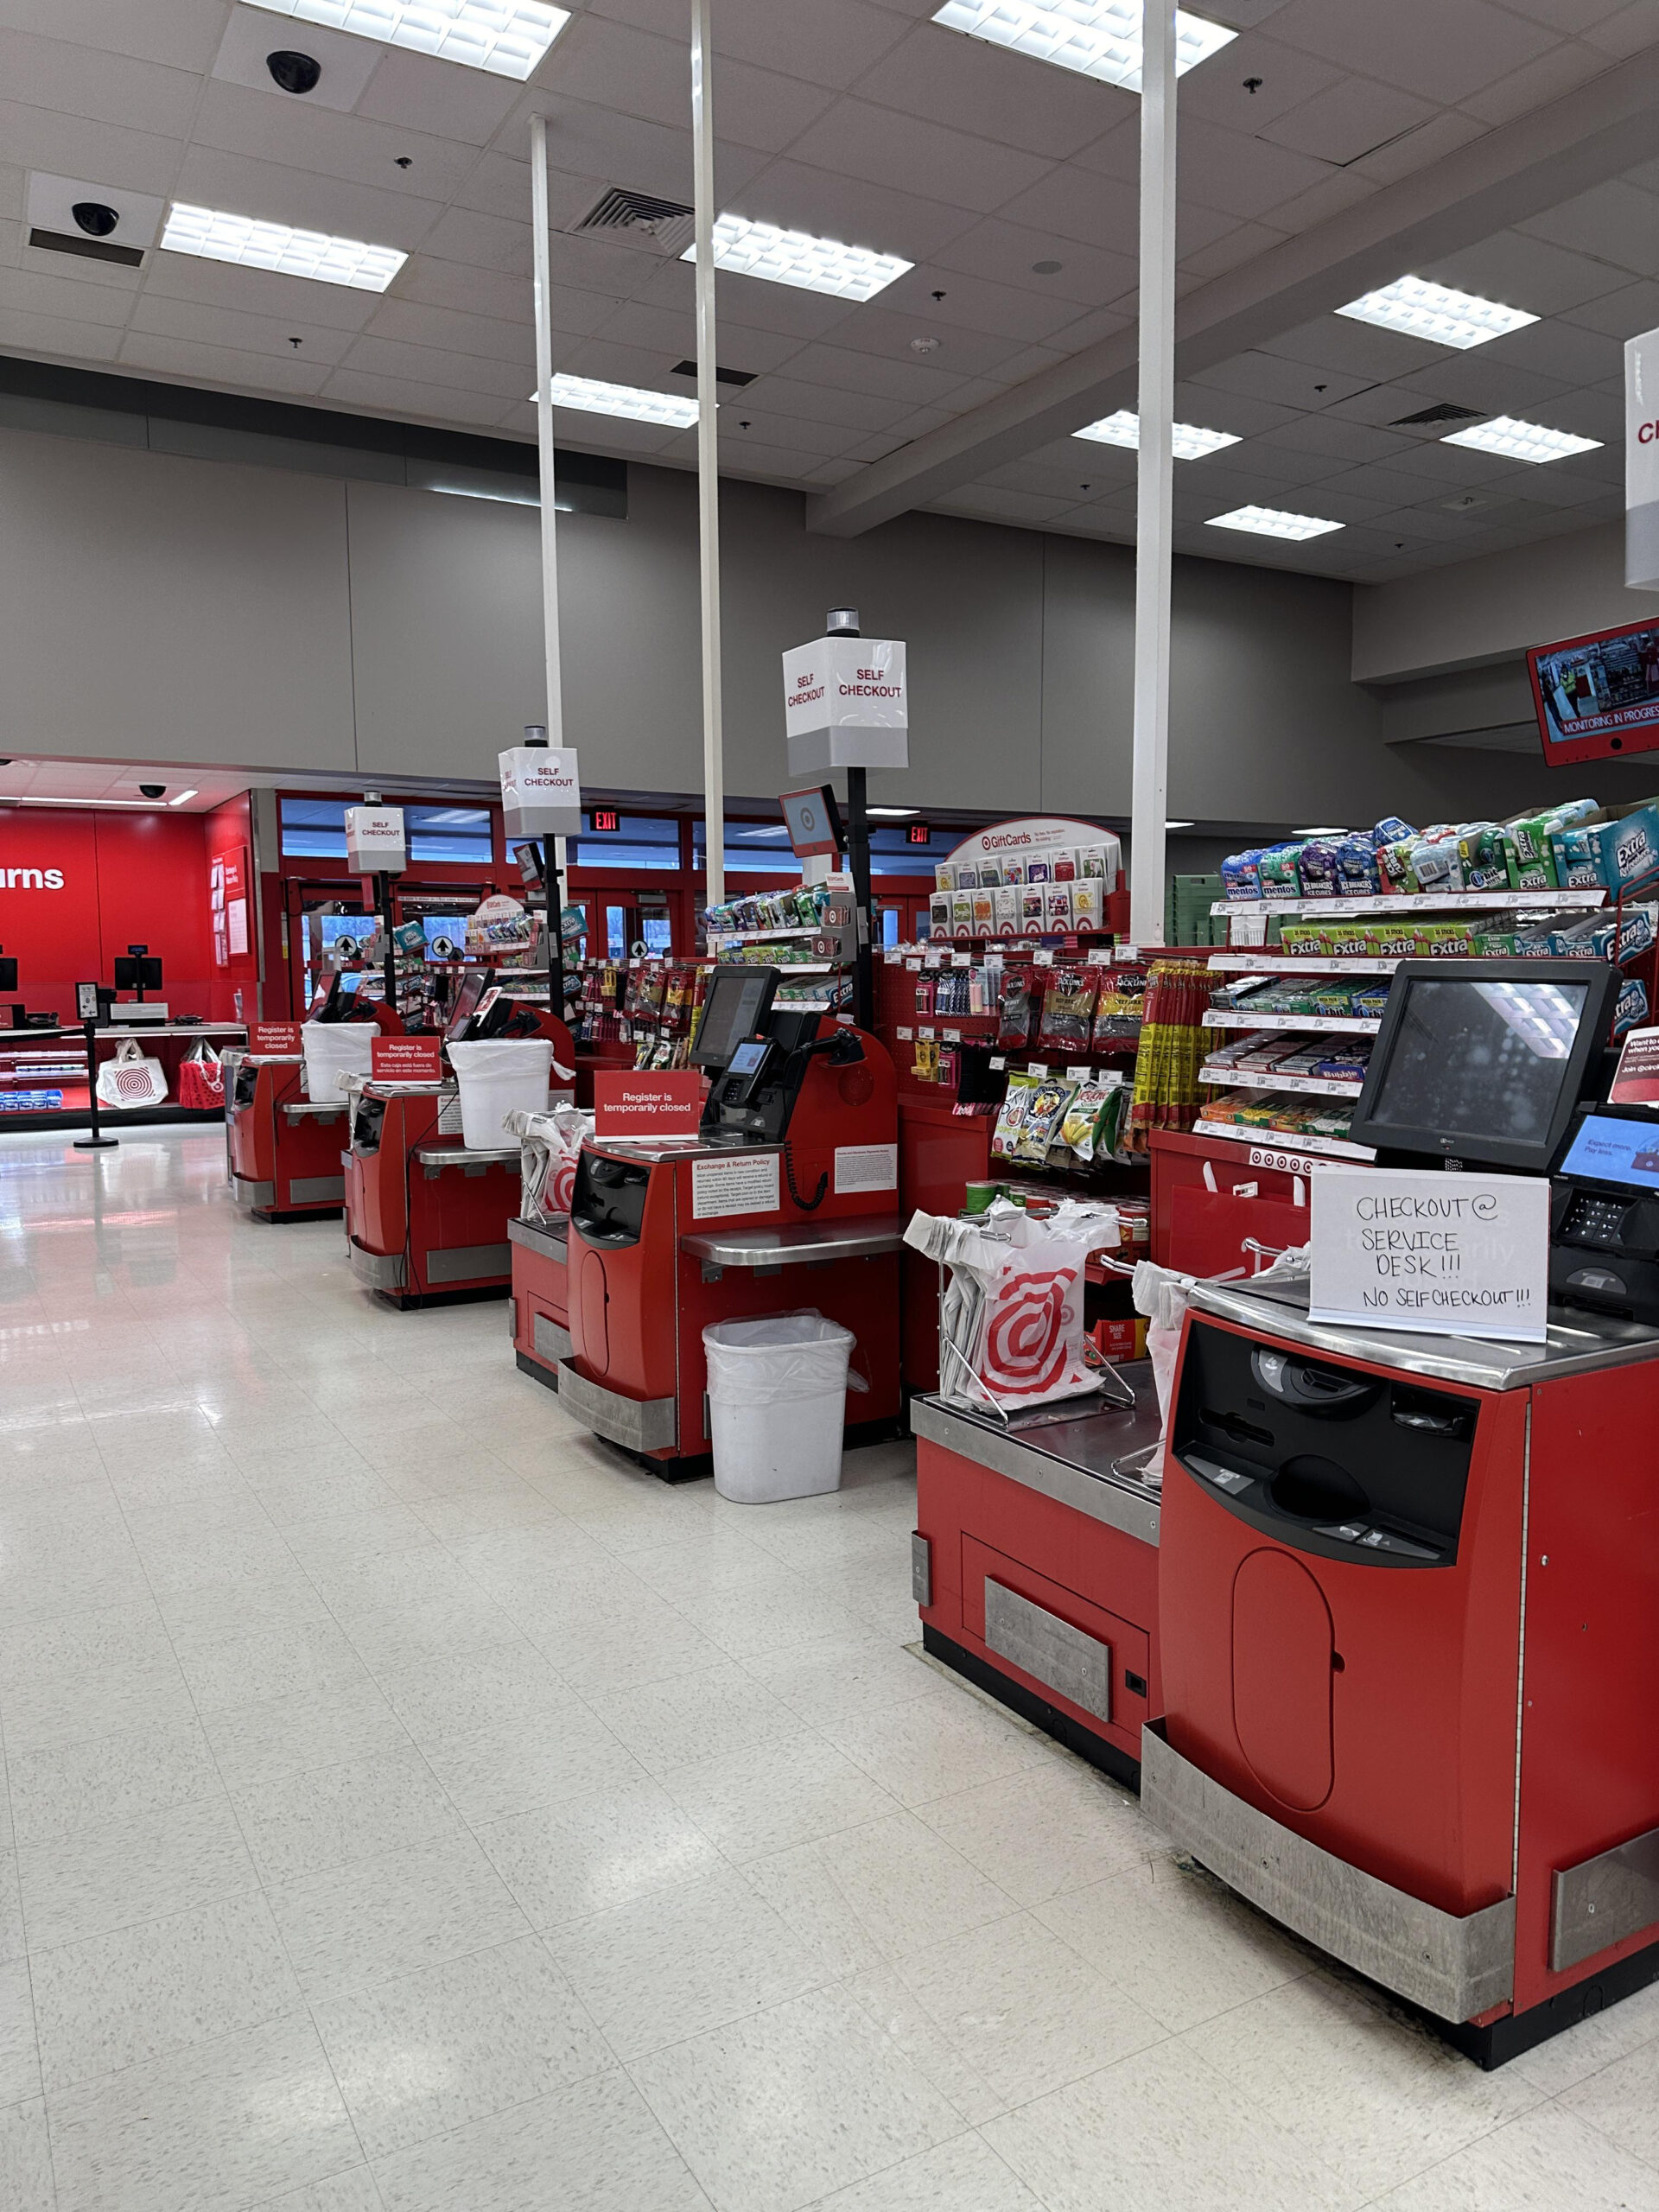 This Is Awful. : R/Target in Target W2 2021 Former Employee